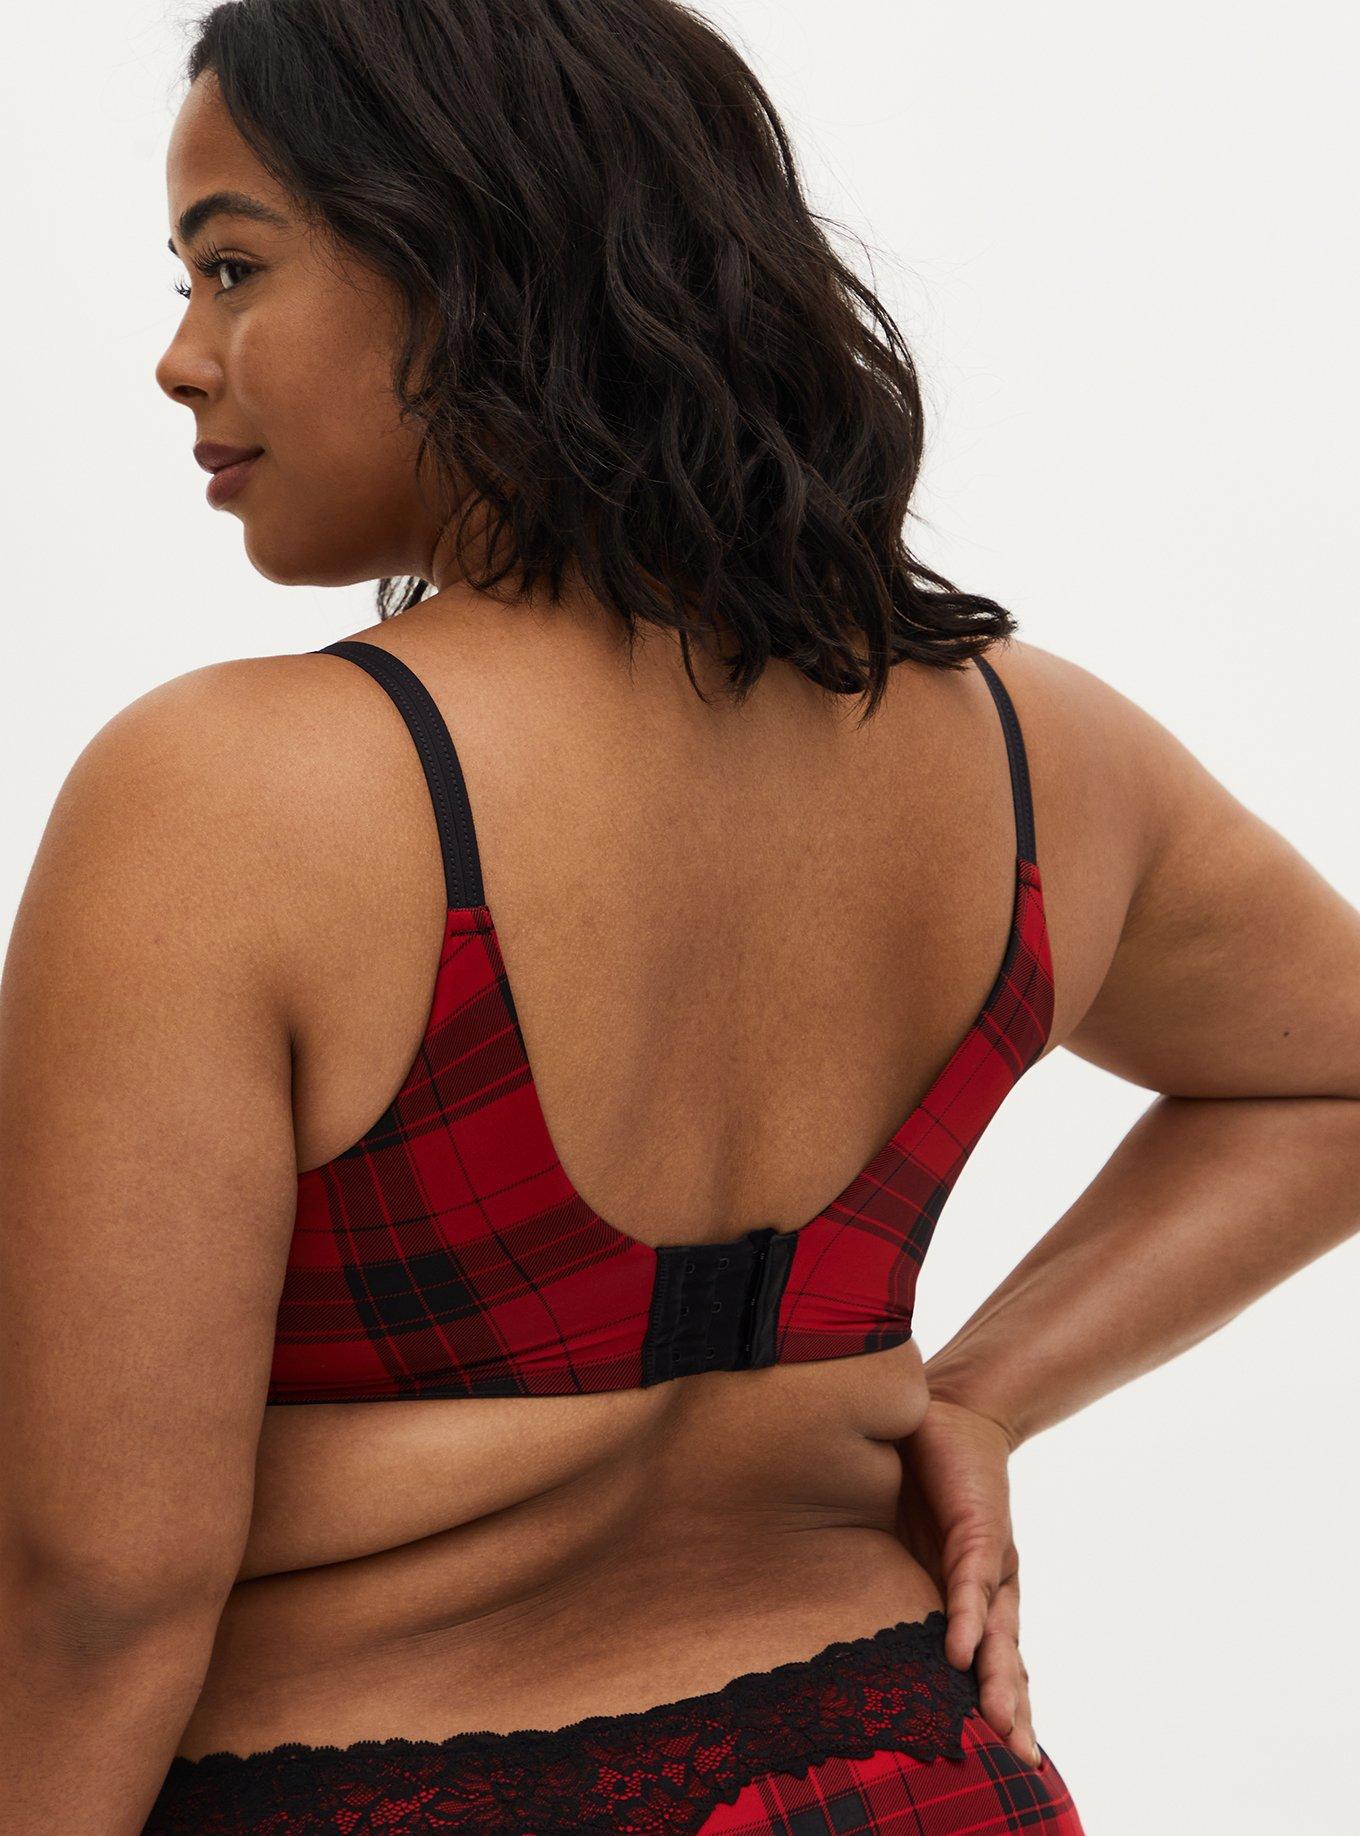 Torrid - Take the PLUNGE with the XO Plunge Push Up Bra